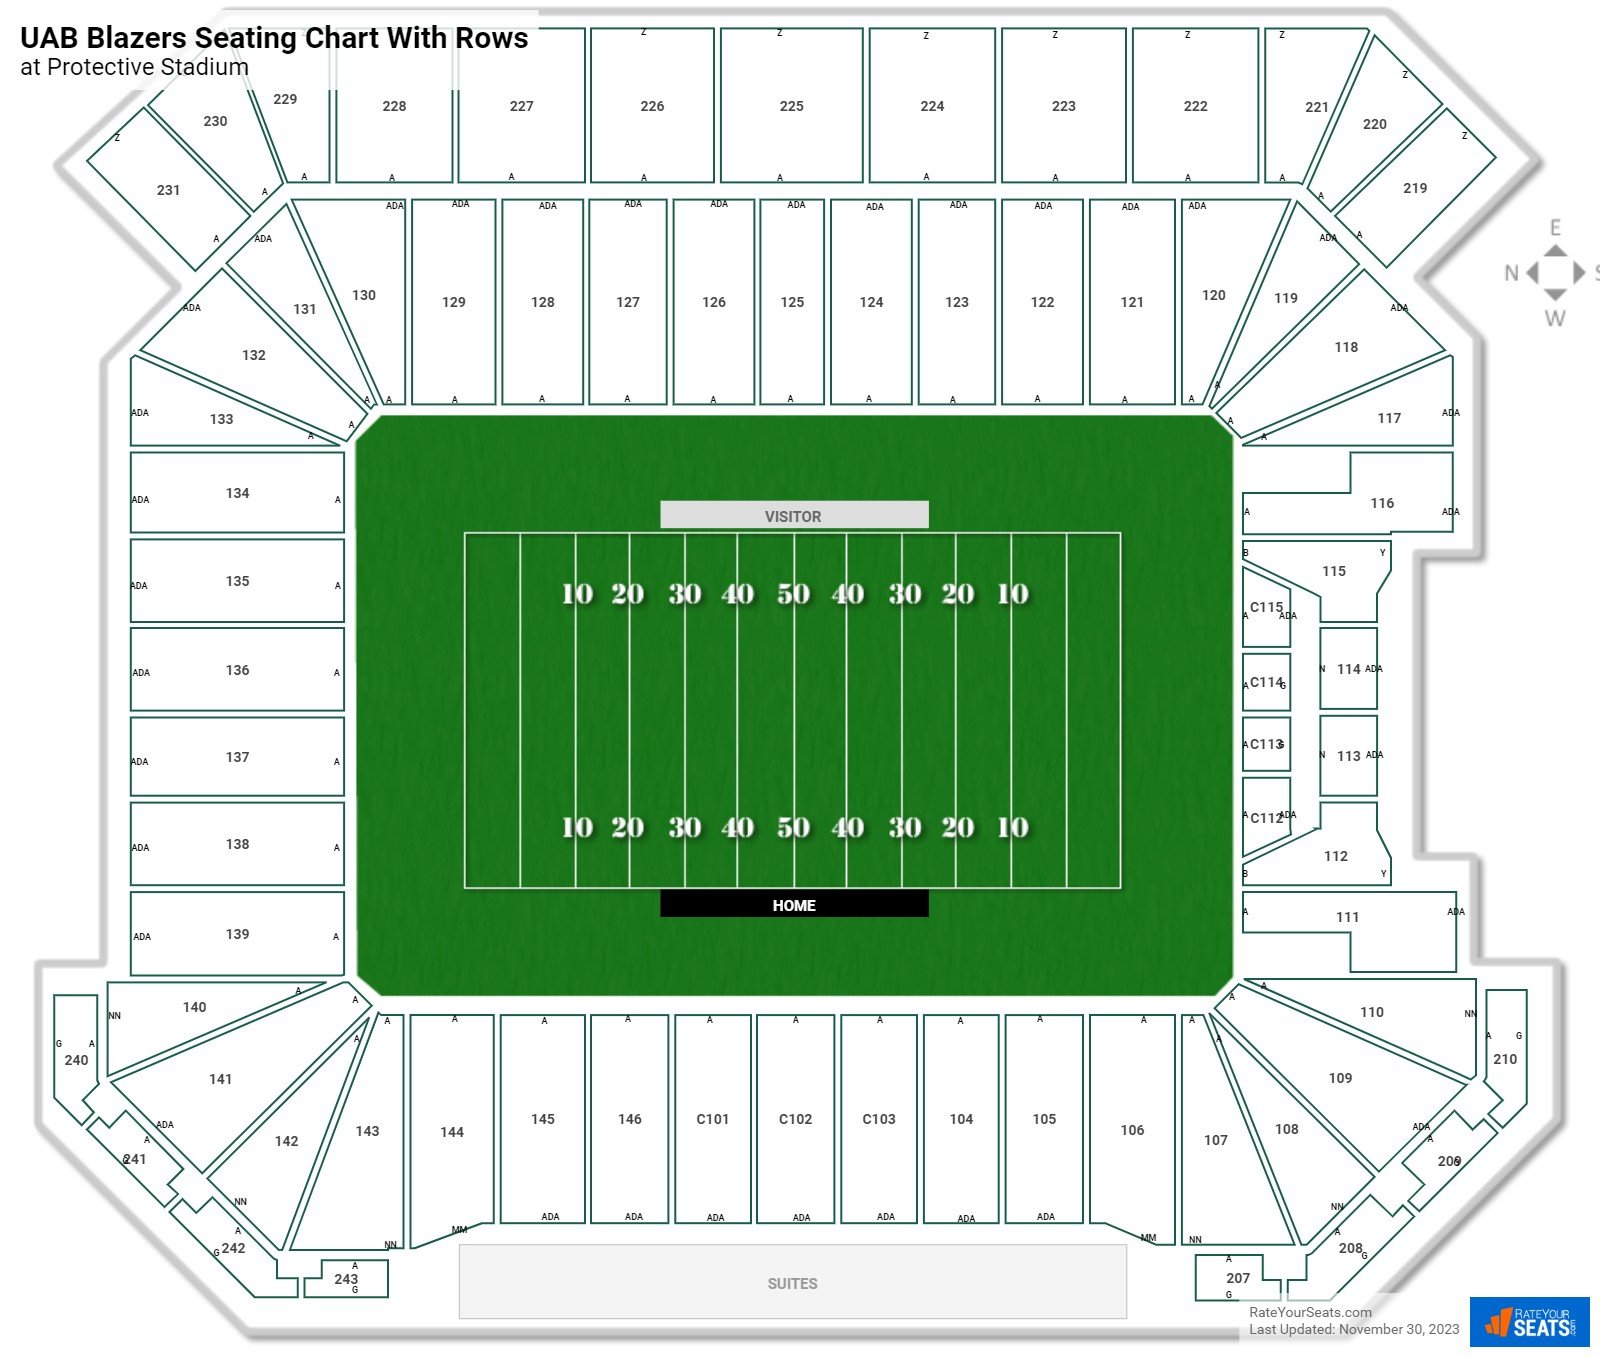 Protective Stadium seating chart with row numbers